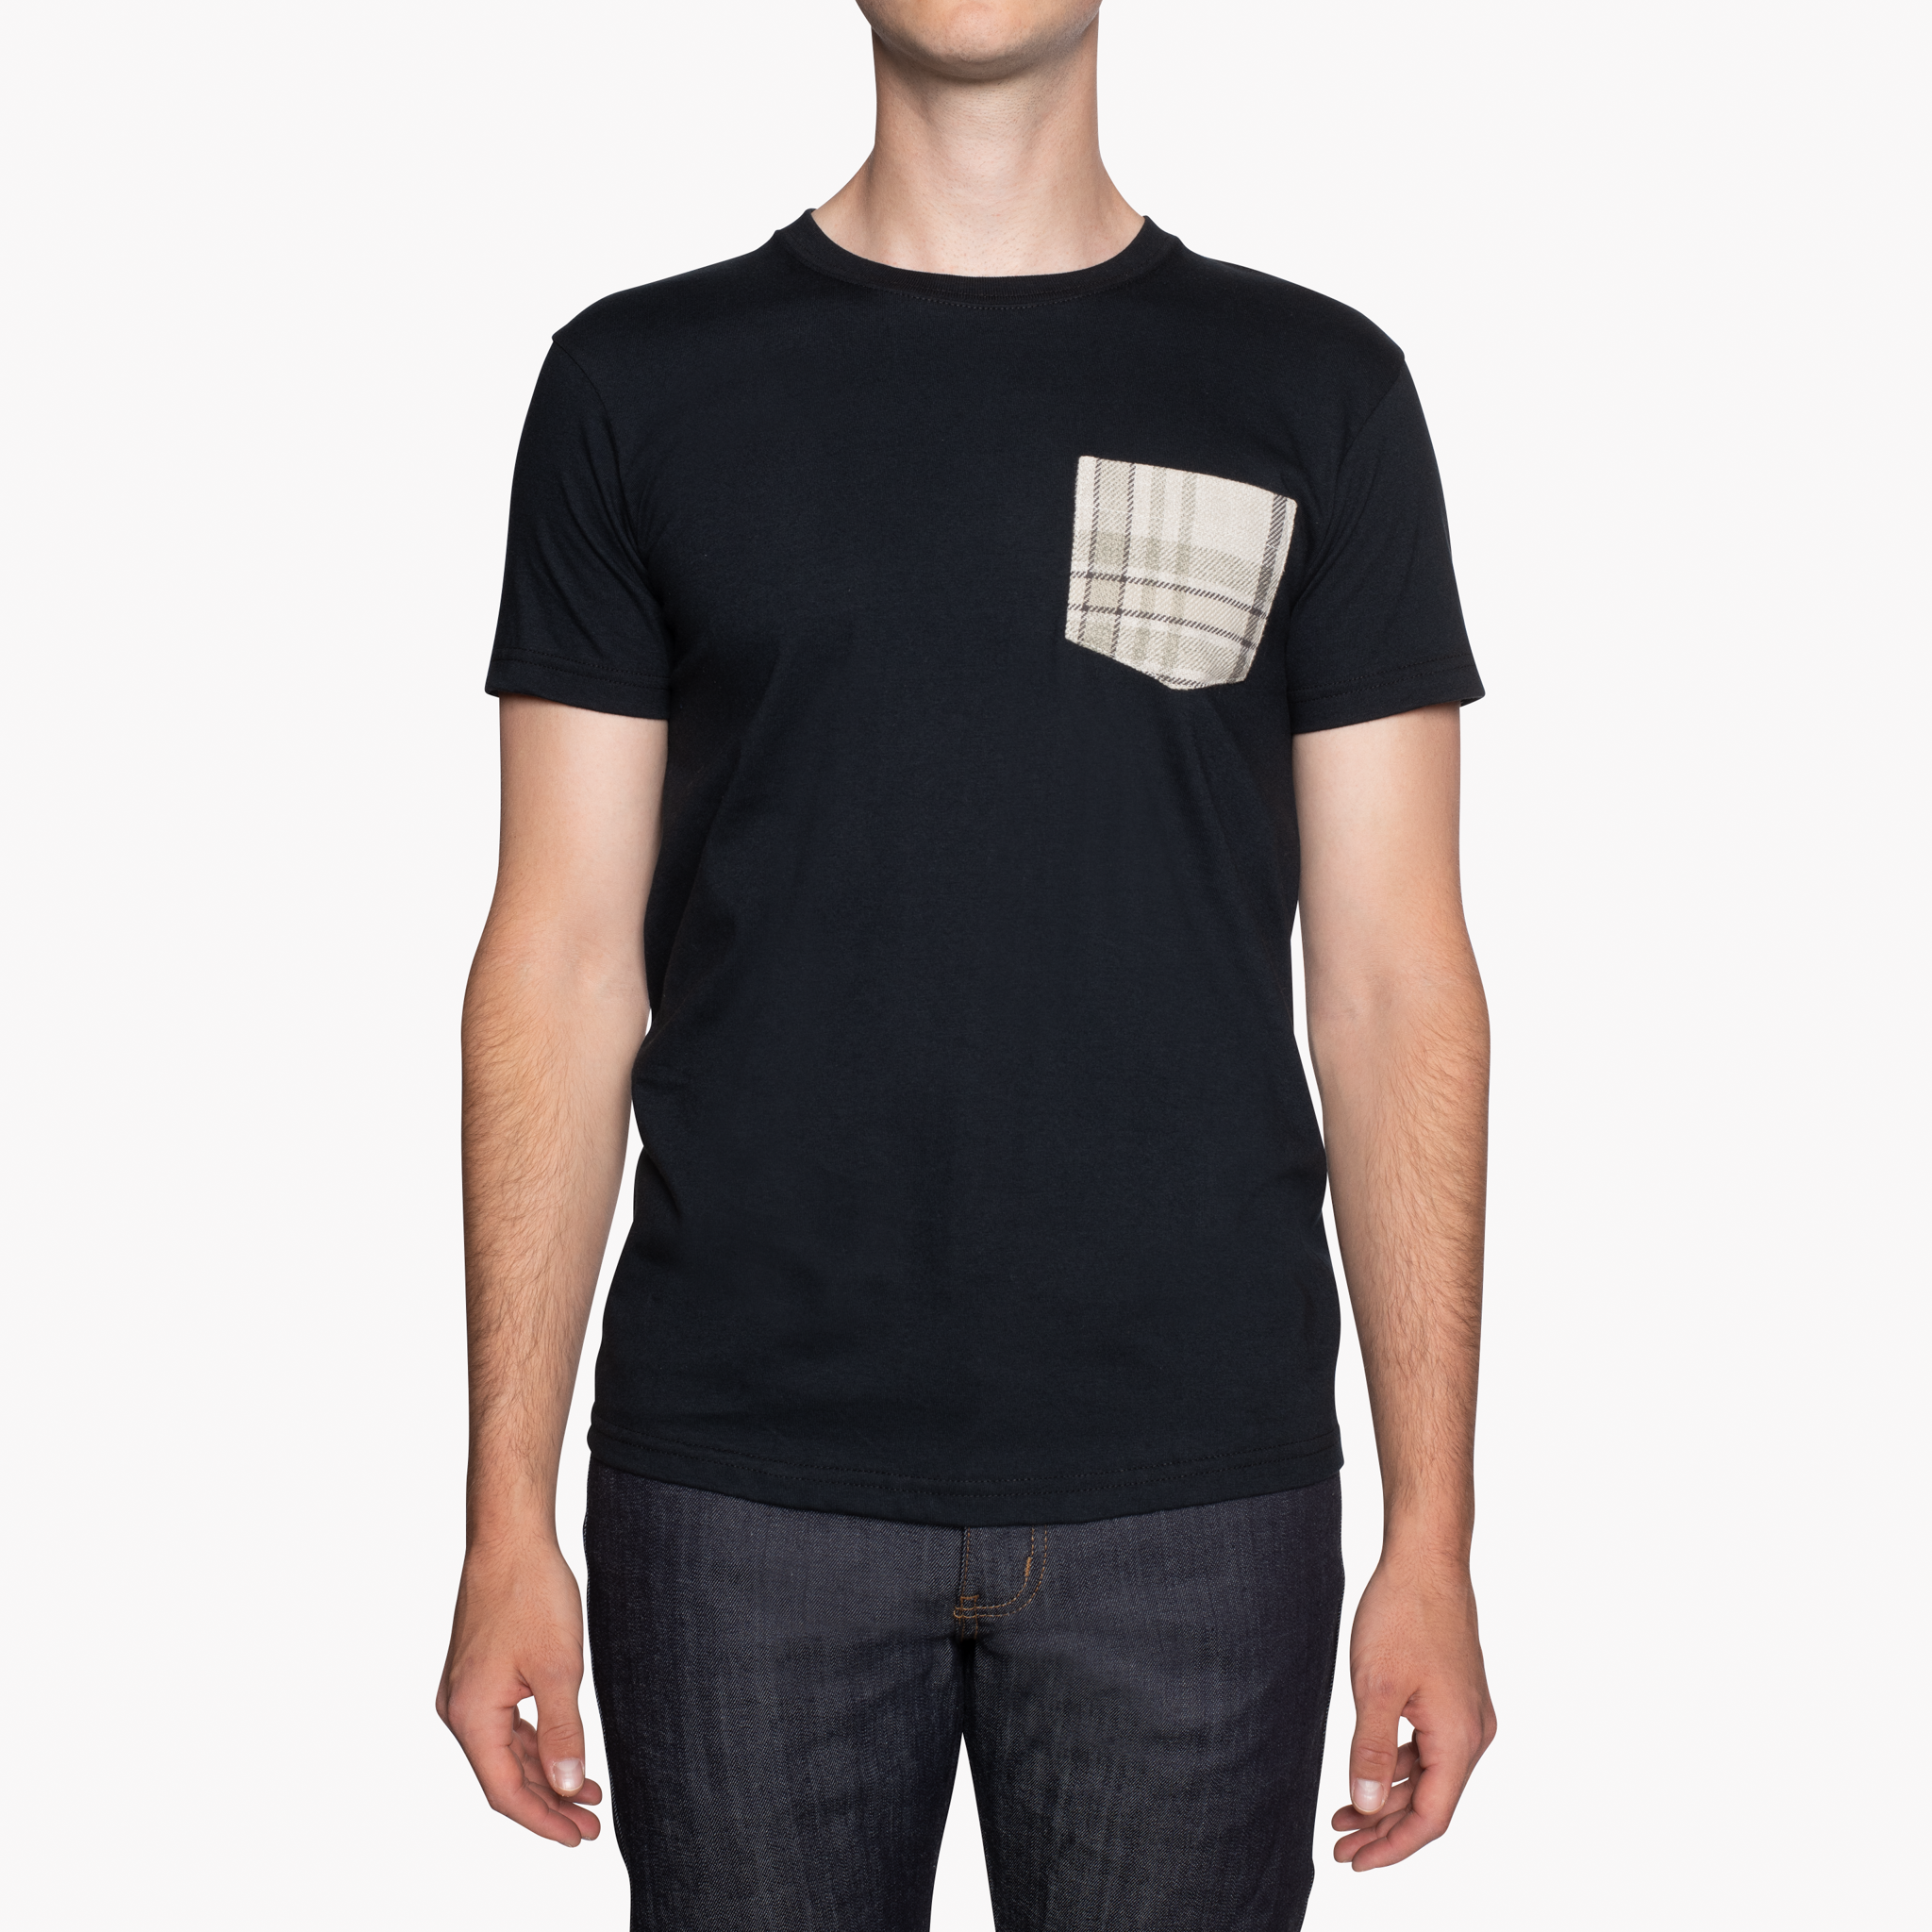  Contract Pocket Tee - Black + Heavy Vintage Flannel Pale Grey - front 